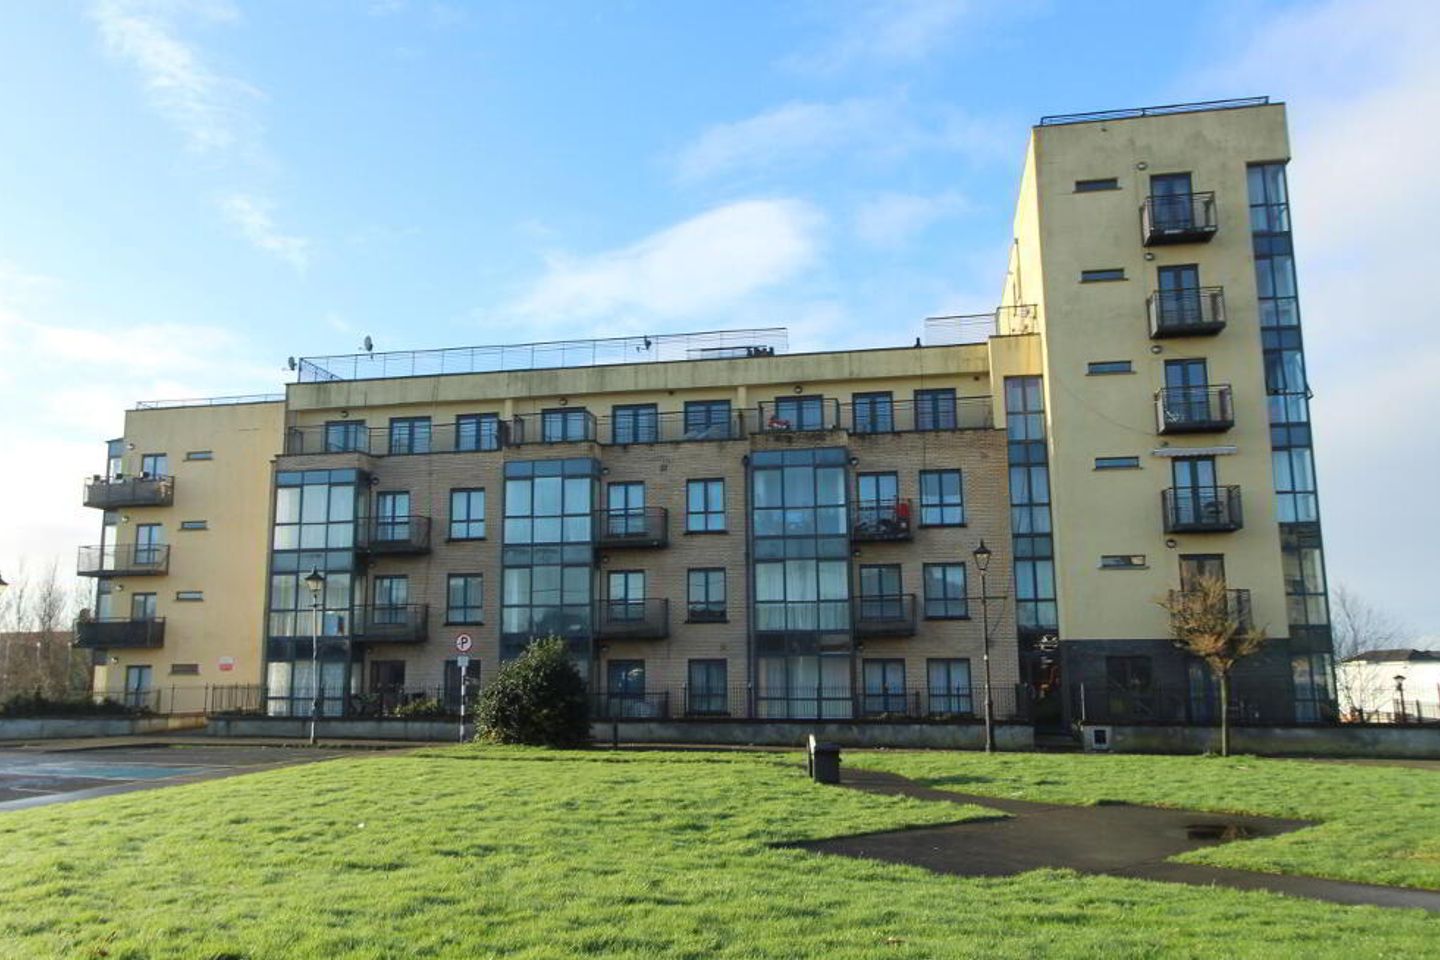 Apartment 29 Harbour Point, Longford Town, Co. Longford, N39W662